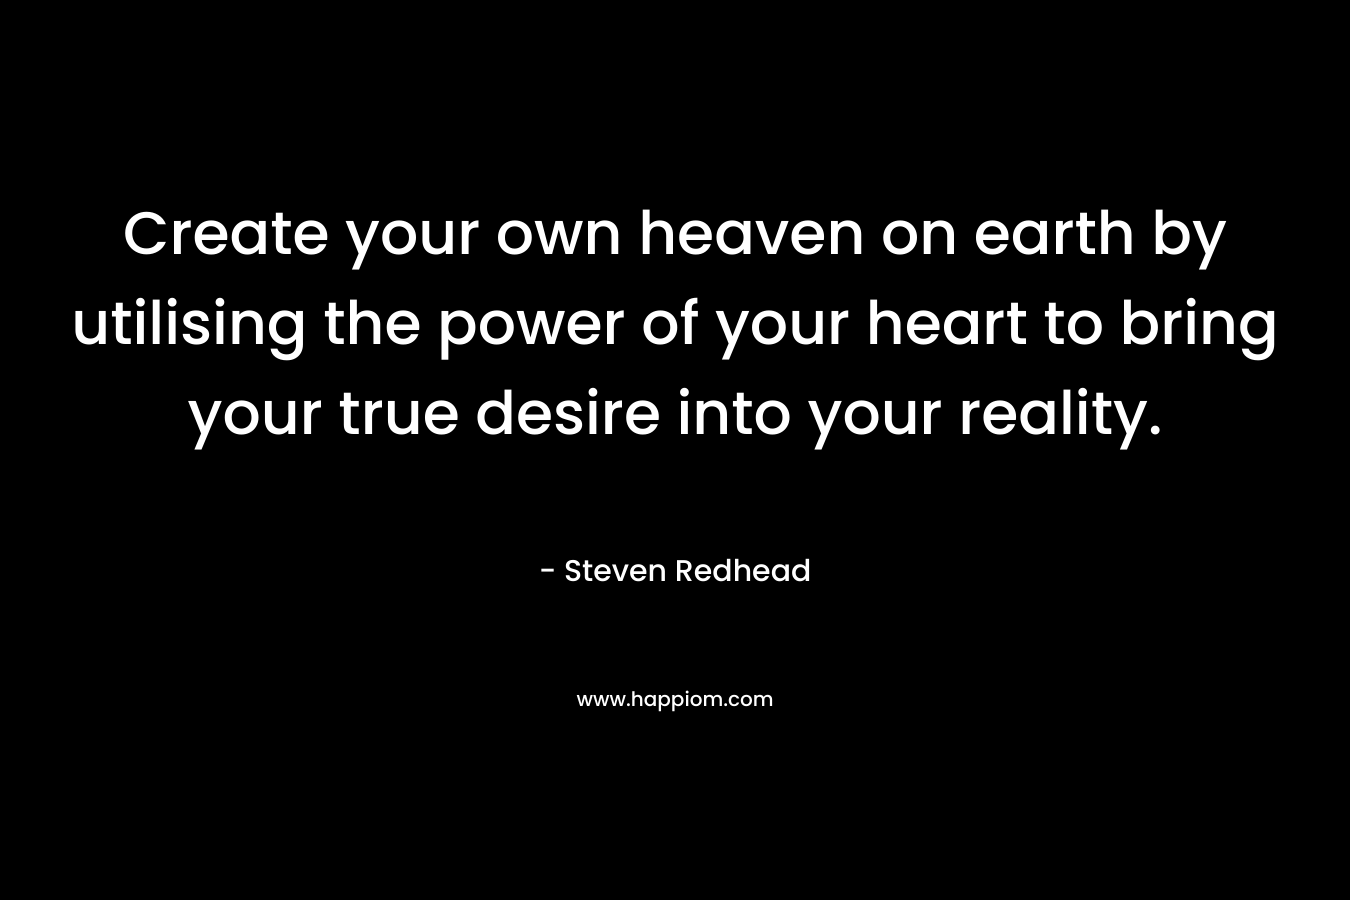 Create your own heaven on earth by utilising the power of your heart to bring your true desire into your reality. – Steven Redhead